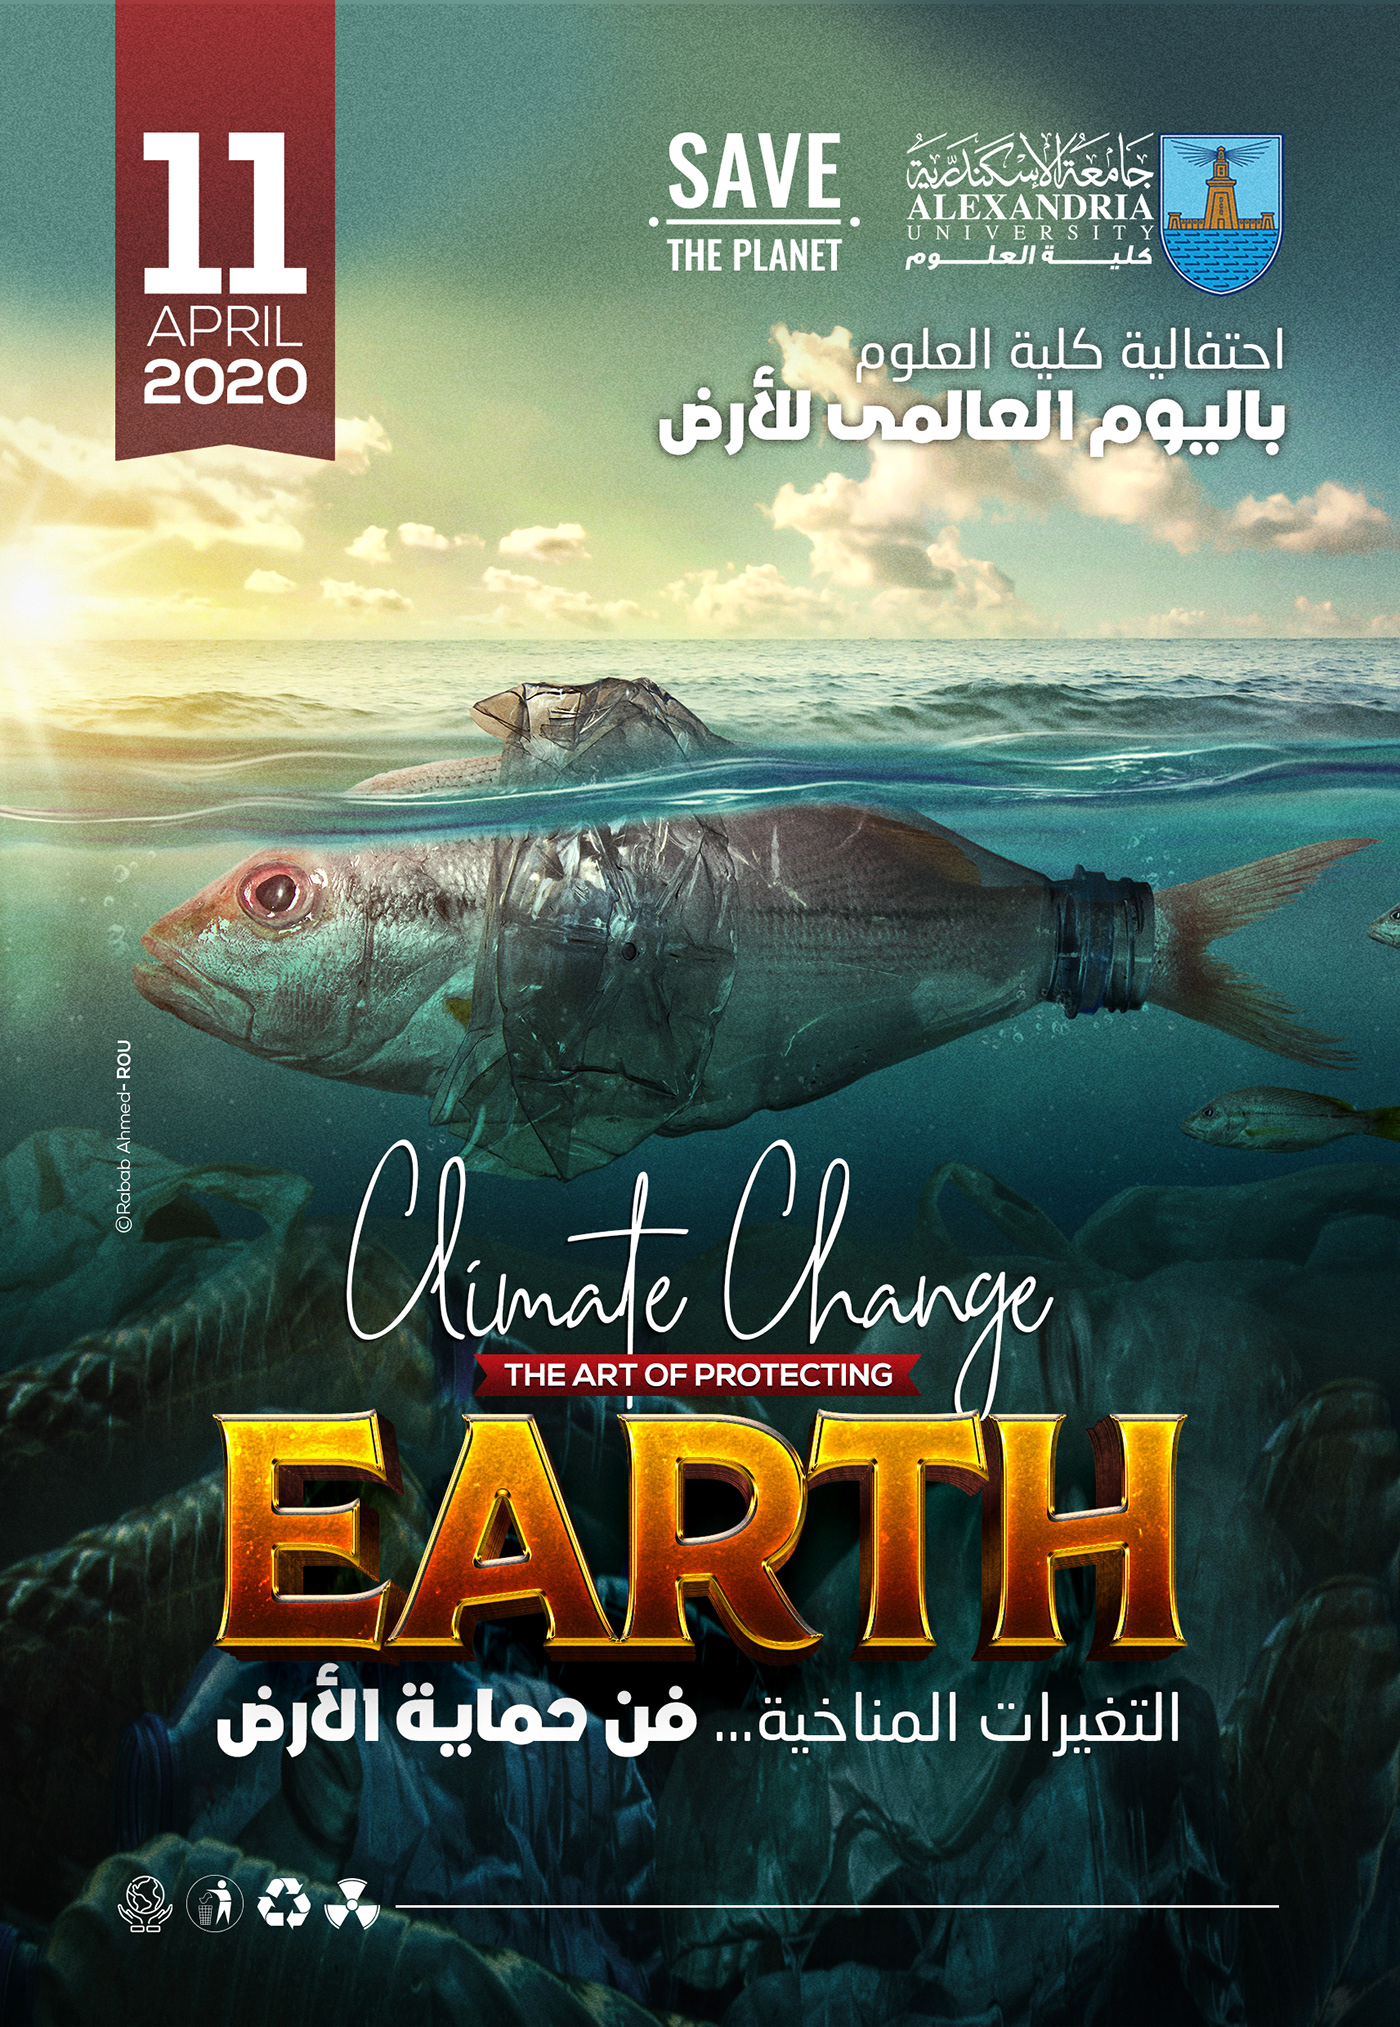 climate change earth day Nature save world